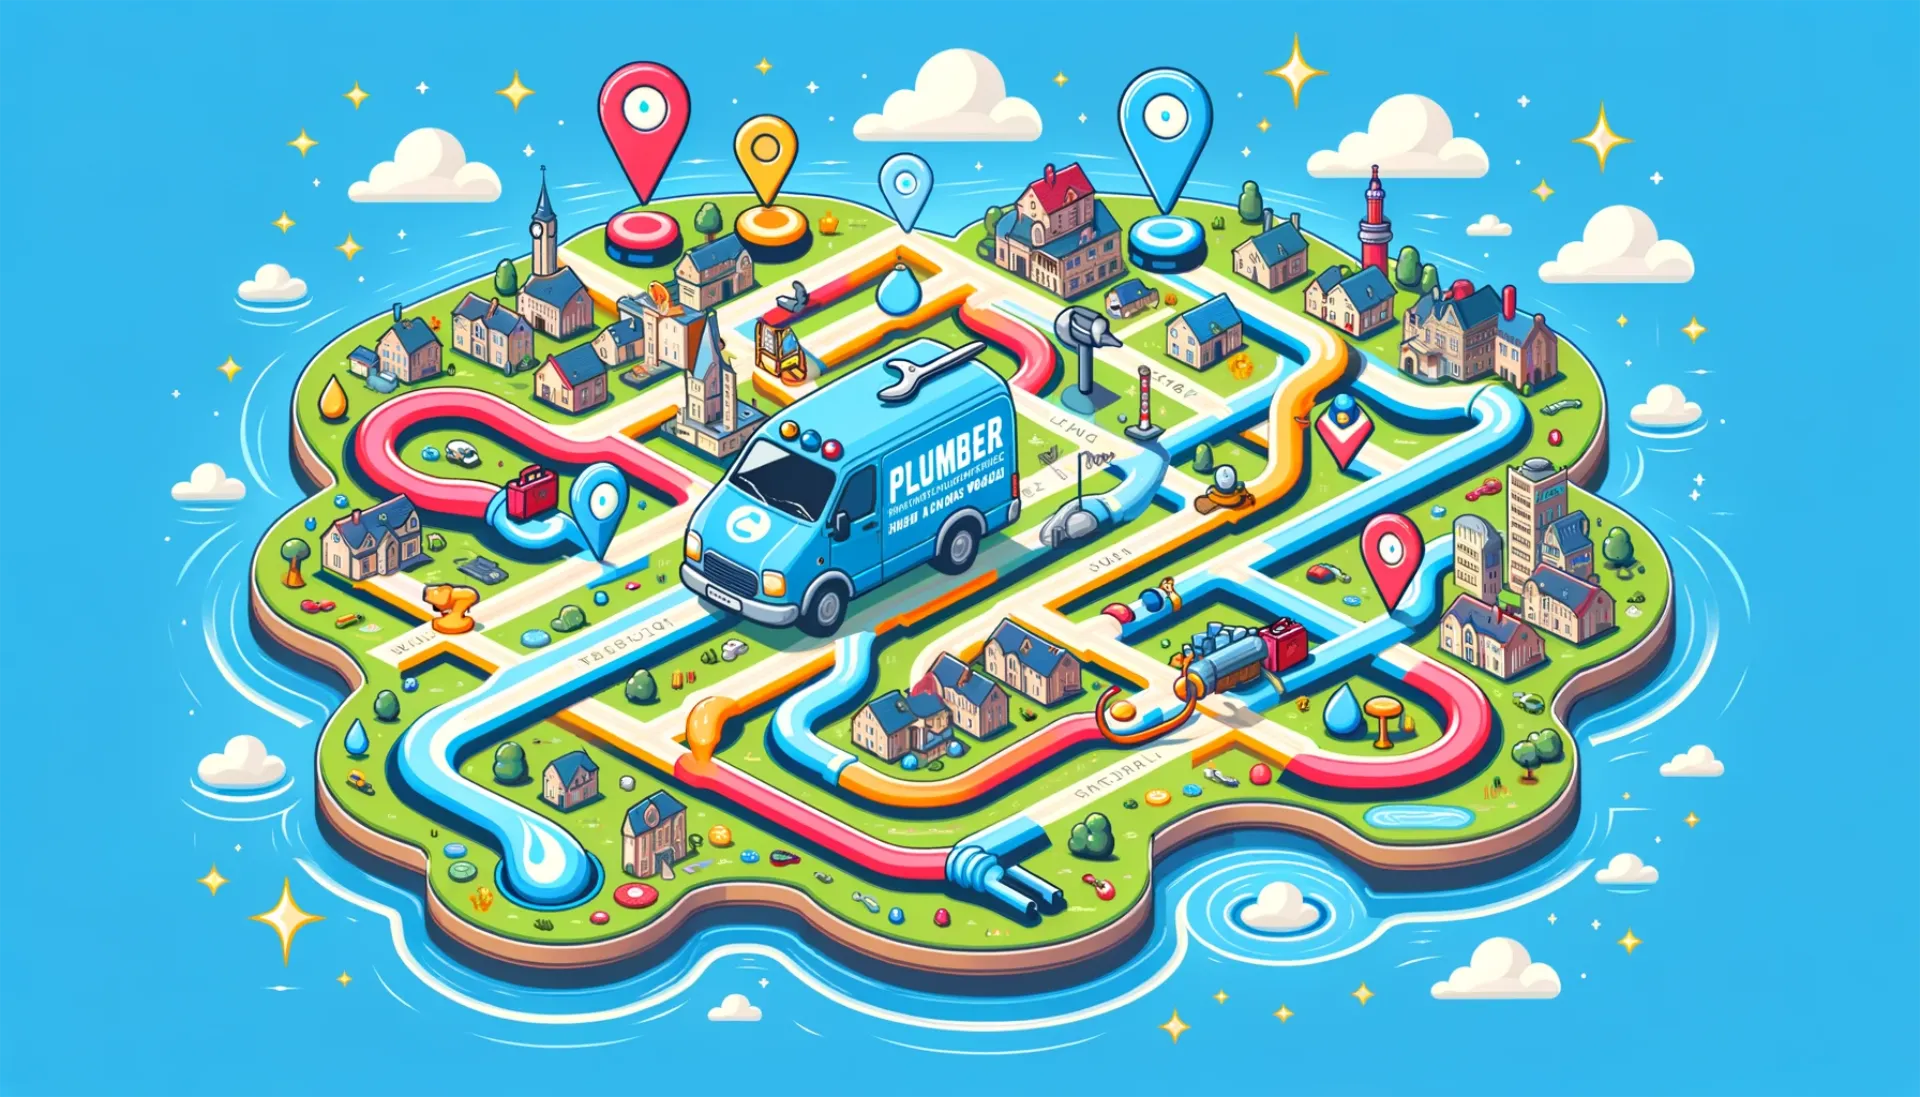 Service Areas HM Plumbing: The illustration showcases a vibrant, cartoon-style map highlighting a plumber's local service areas. This playful and engaging map effectively conveys the extensive reach of the plumber's services, making it an ideal visual representation for their local coverage.